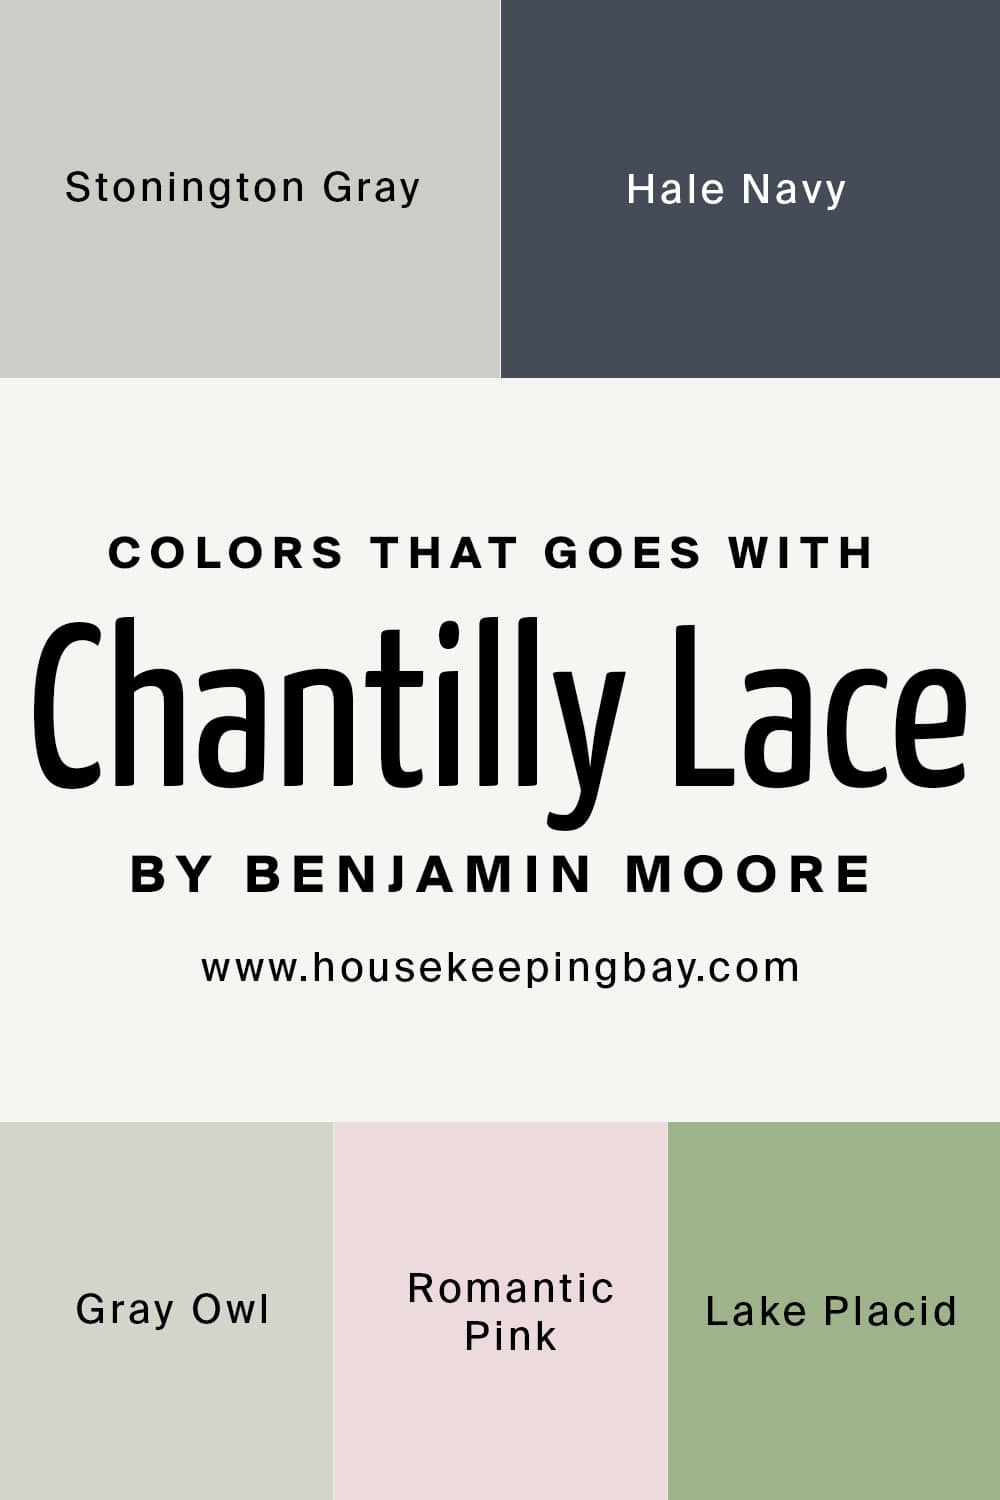 Colors that goes with Chantilly Lace by Benjamin Moore